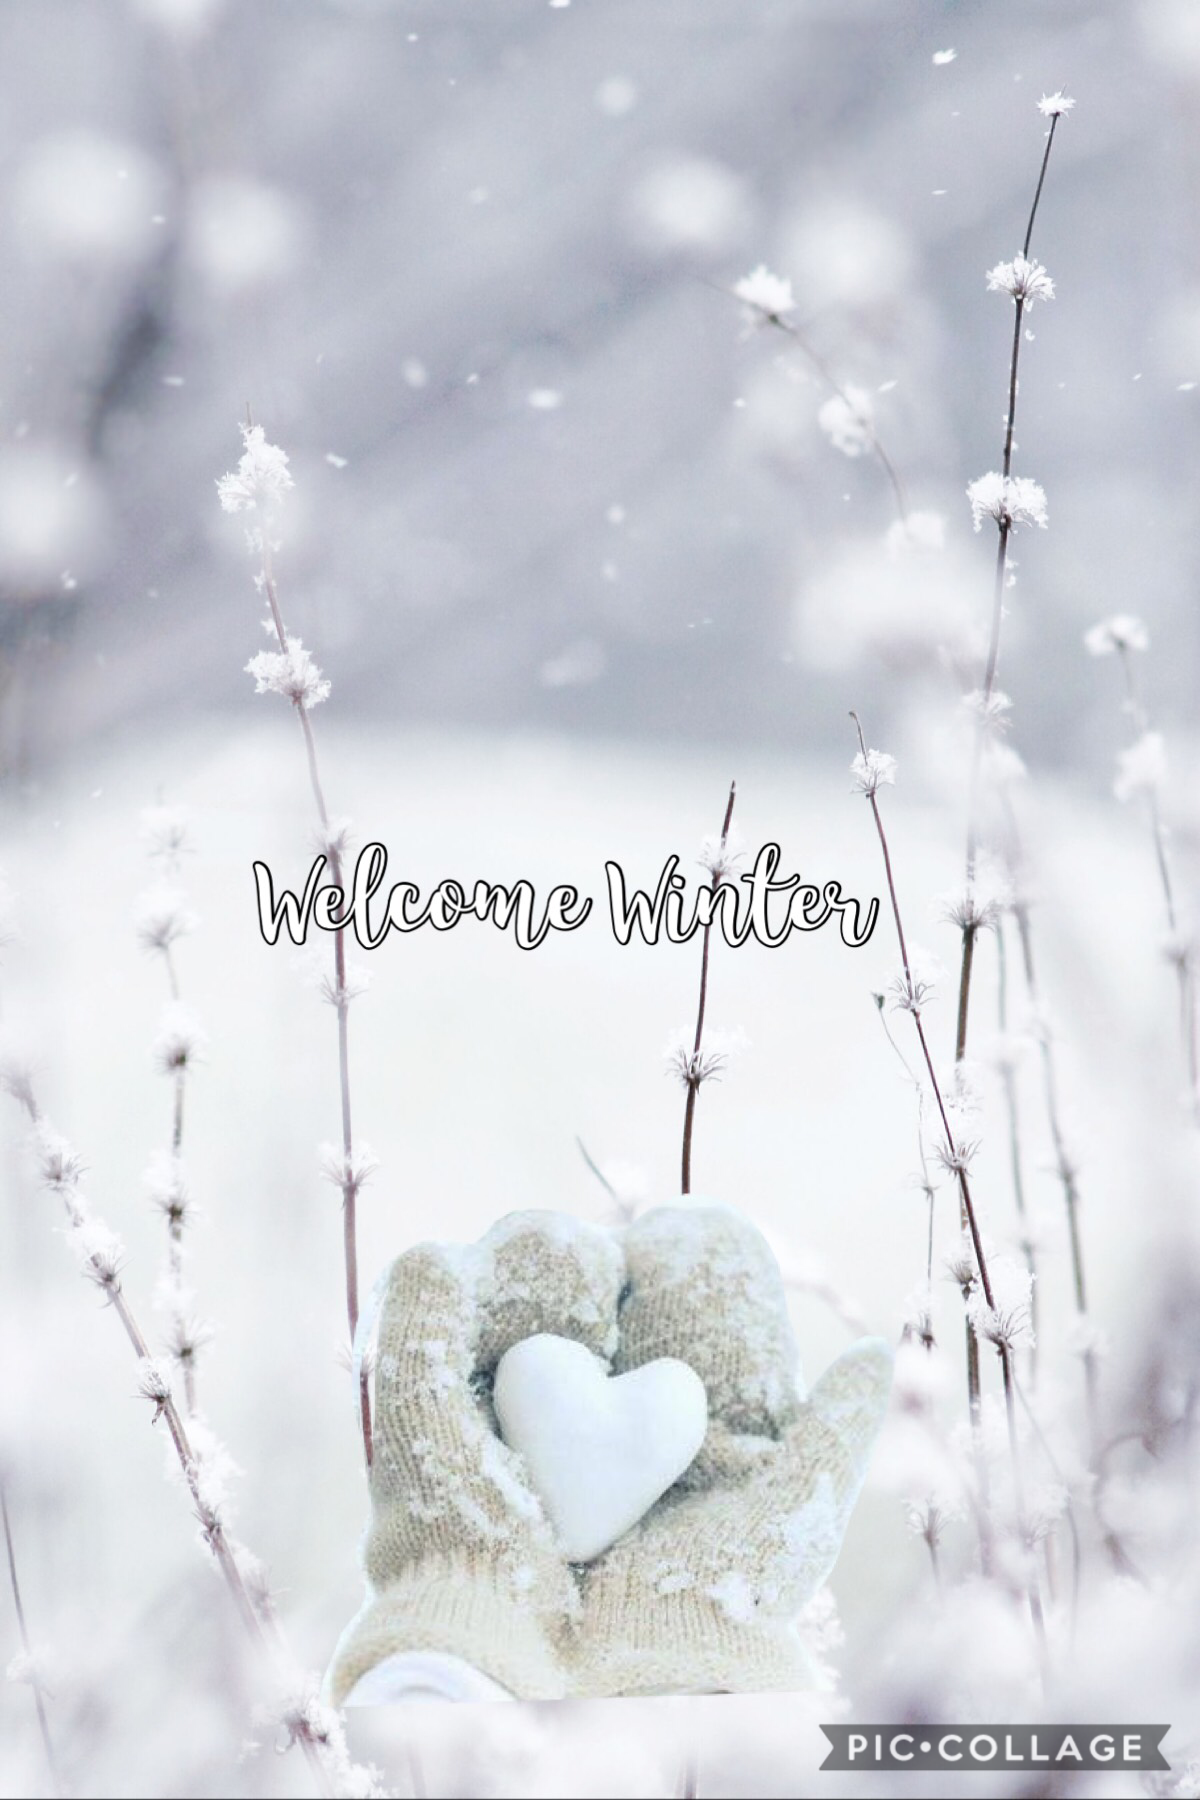 Welcome winter